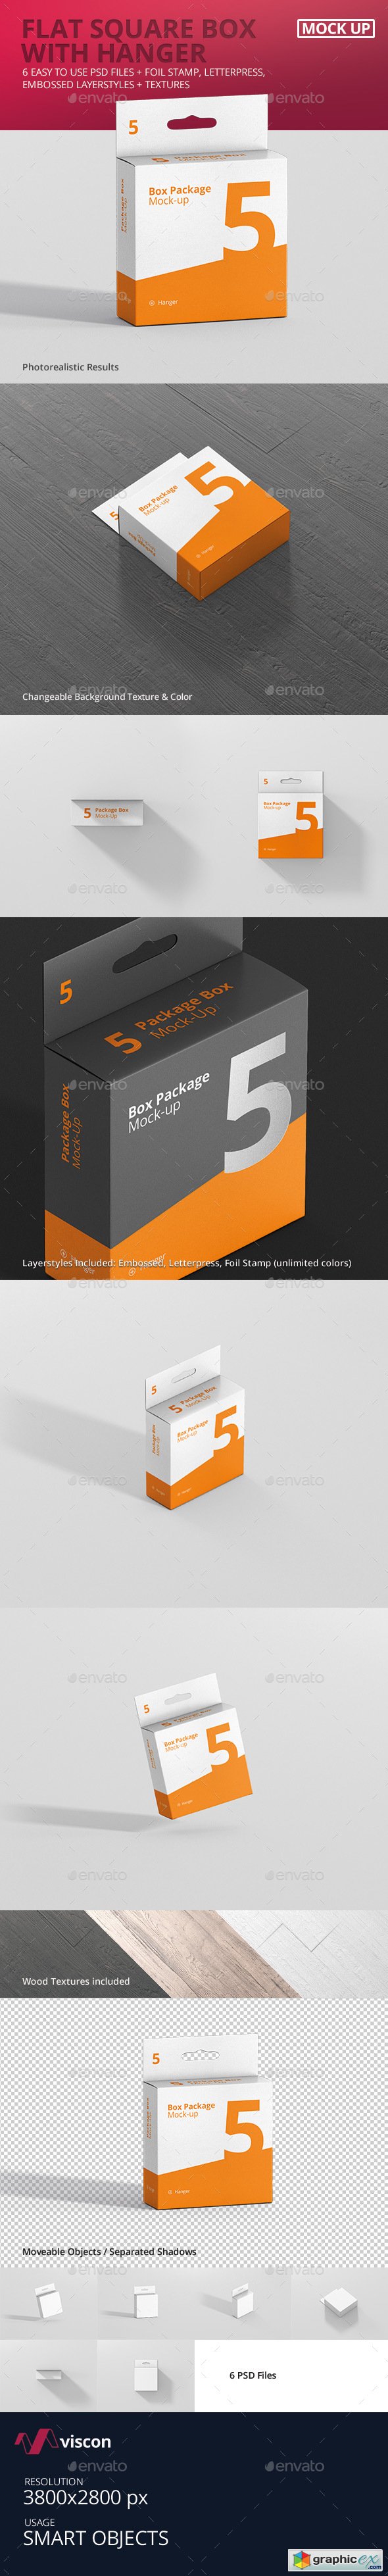 Package Box Mock-Up - Flat Square with Hanger